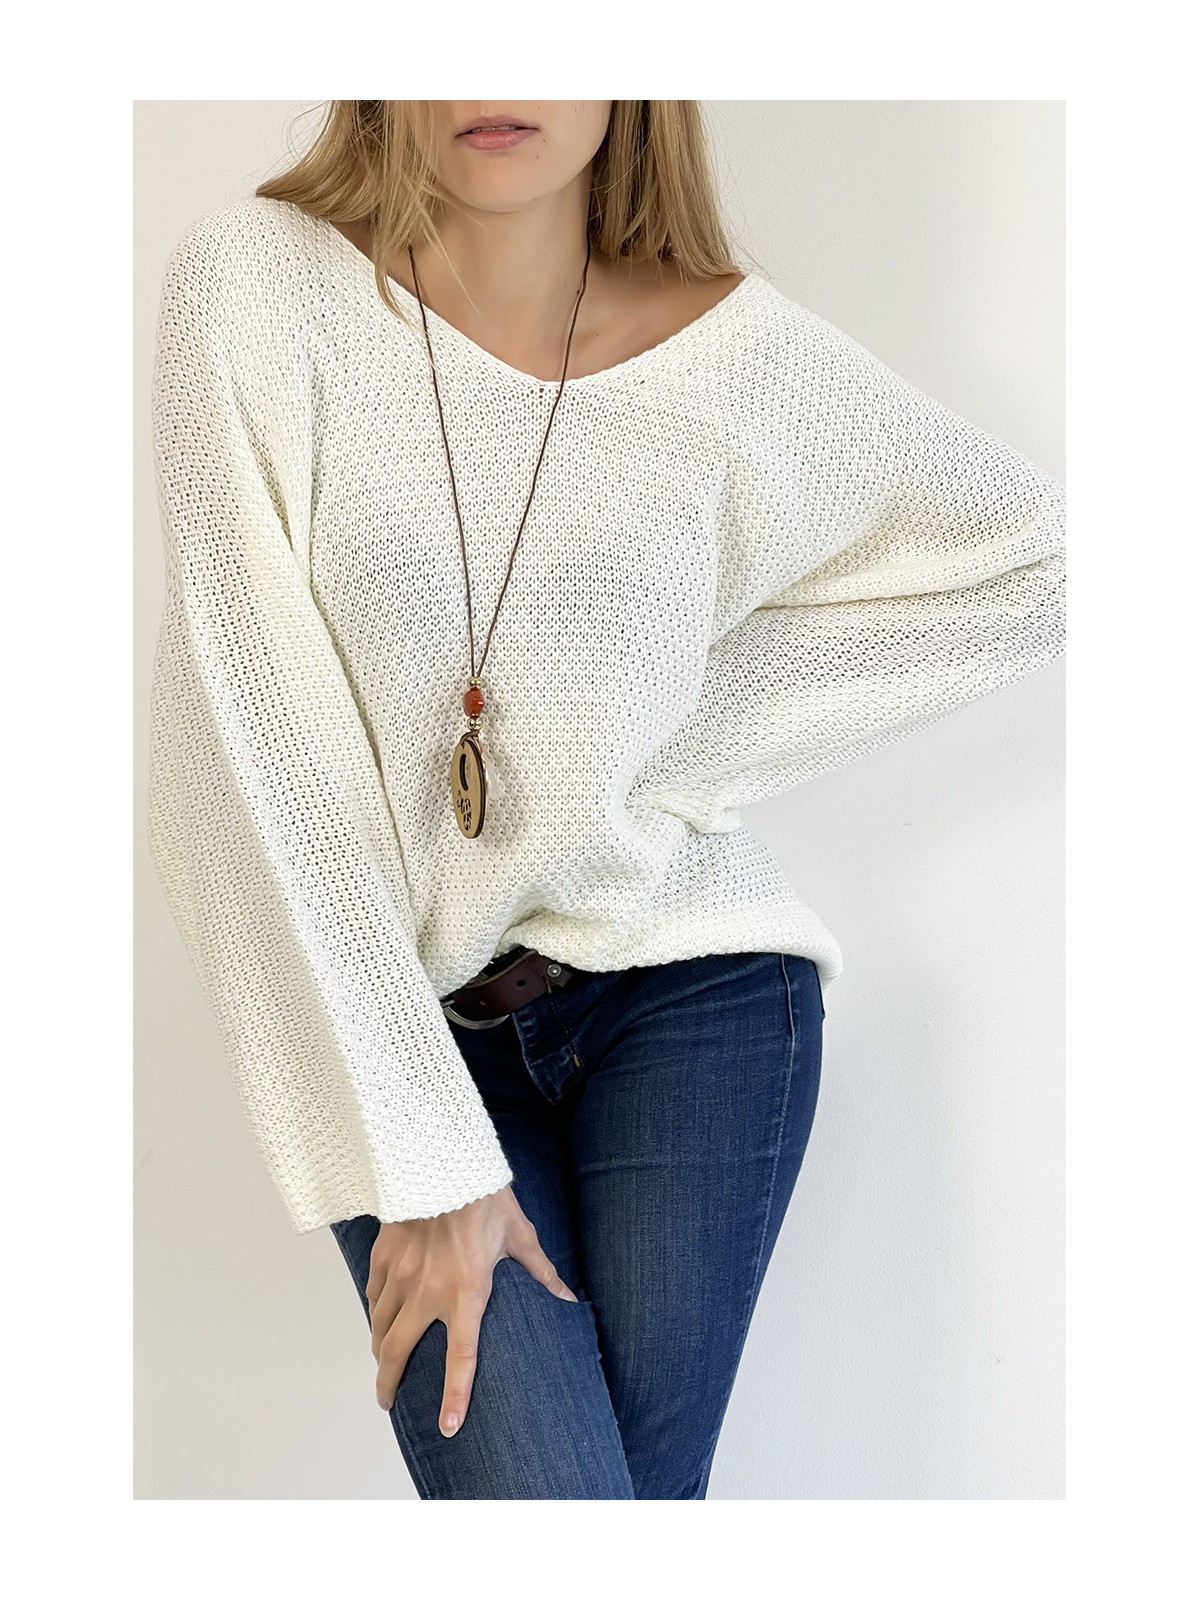 Pull blanc ample col V effet maille avec collier style bohème chic - 3